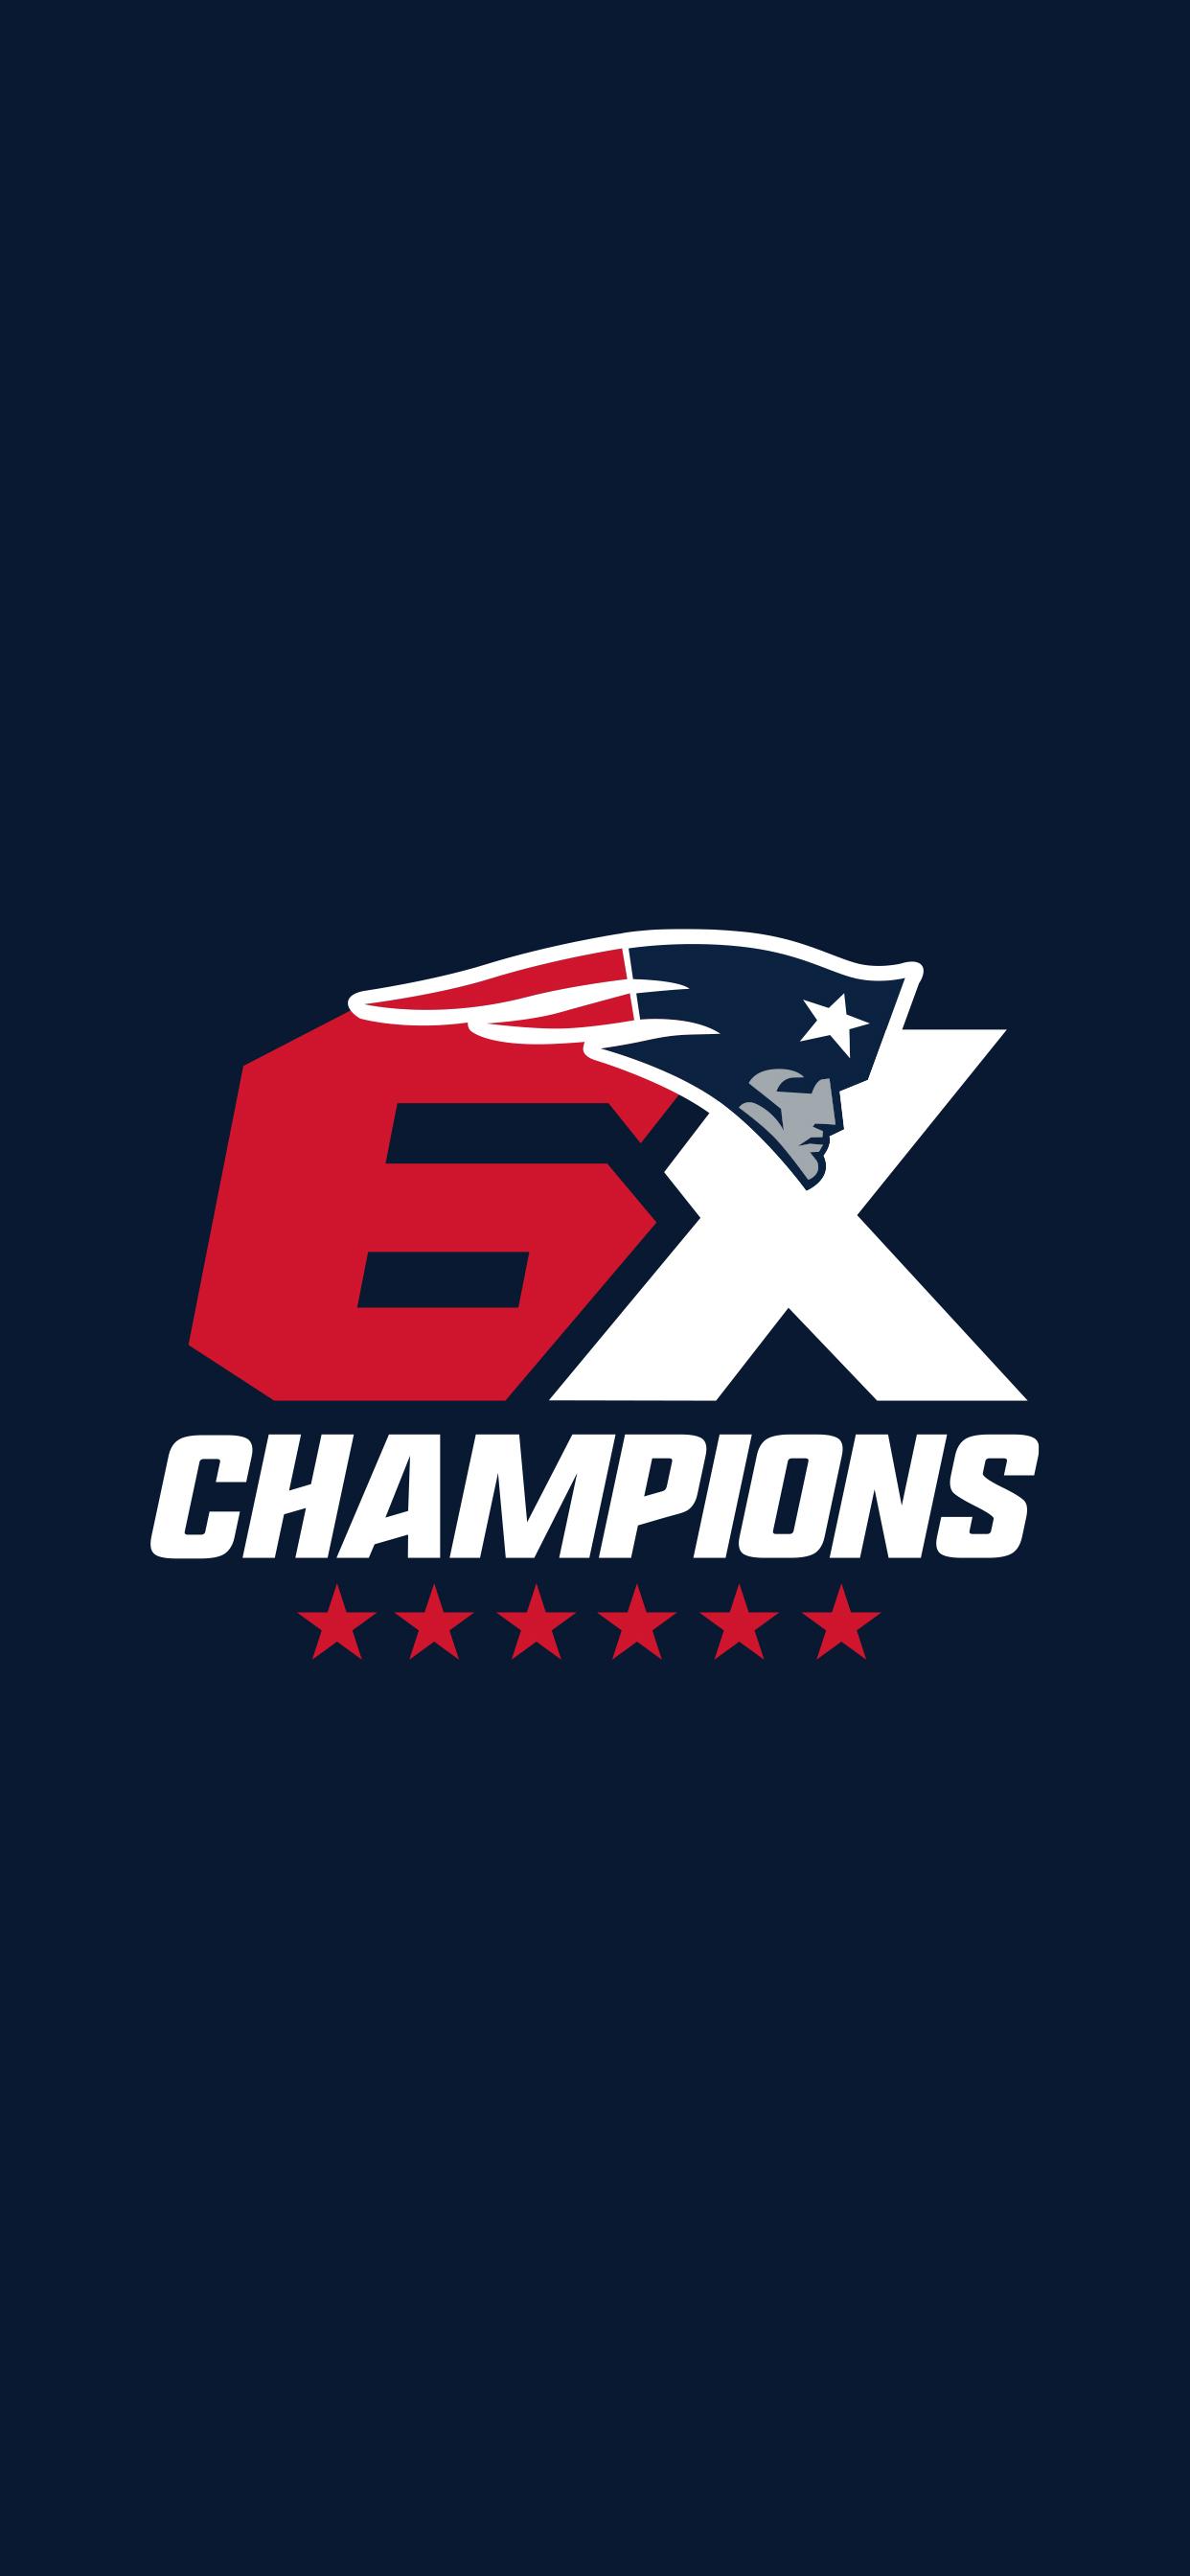 Made the 6X Champions logo into an iPhone wallpaper: Patriots